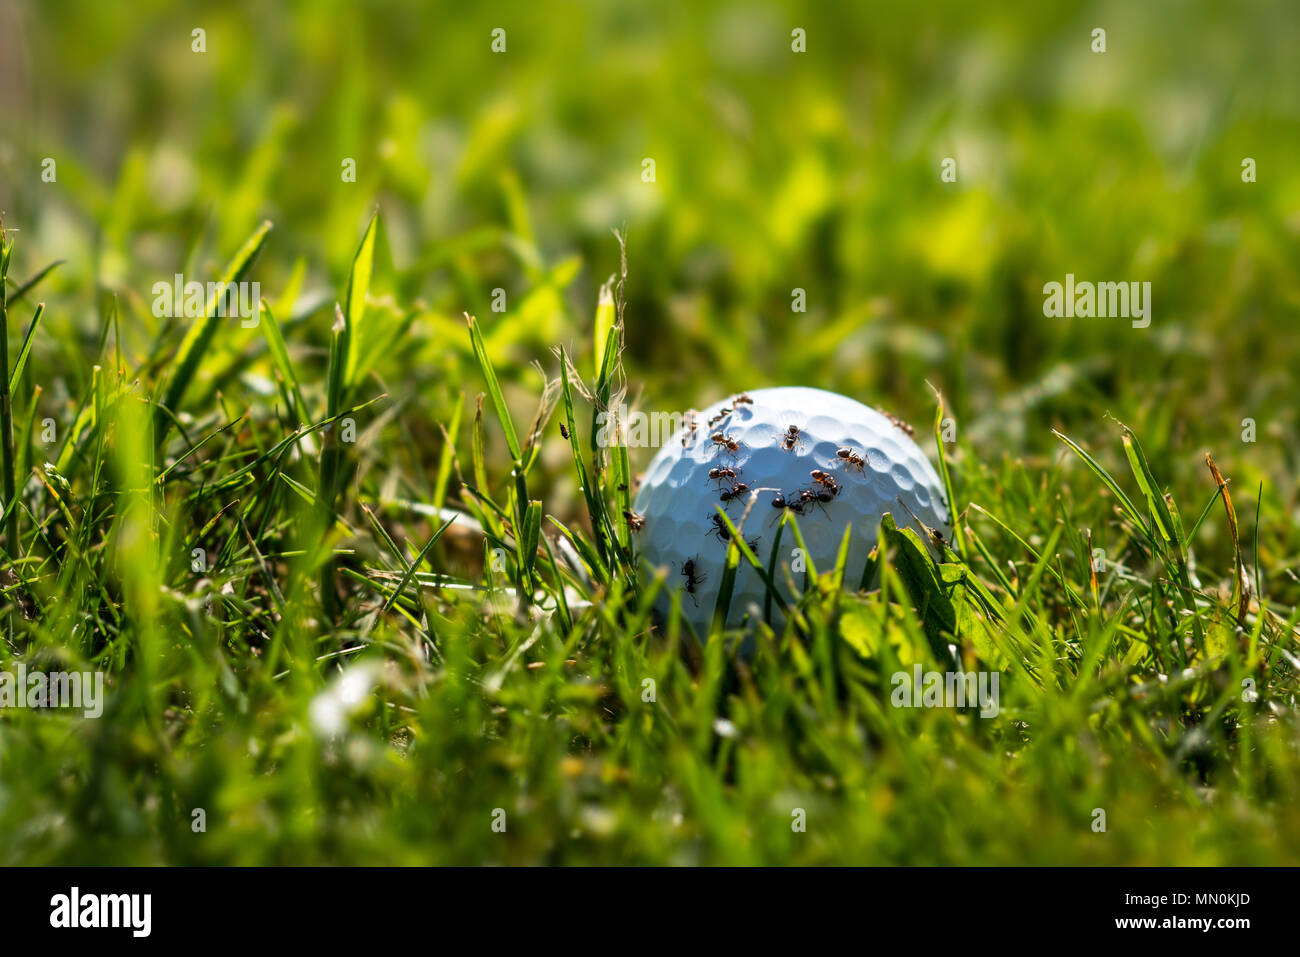 Ants on a golf ball Stock Photo